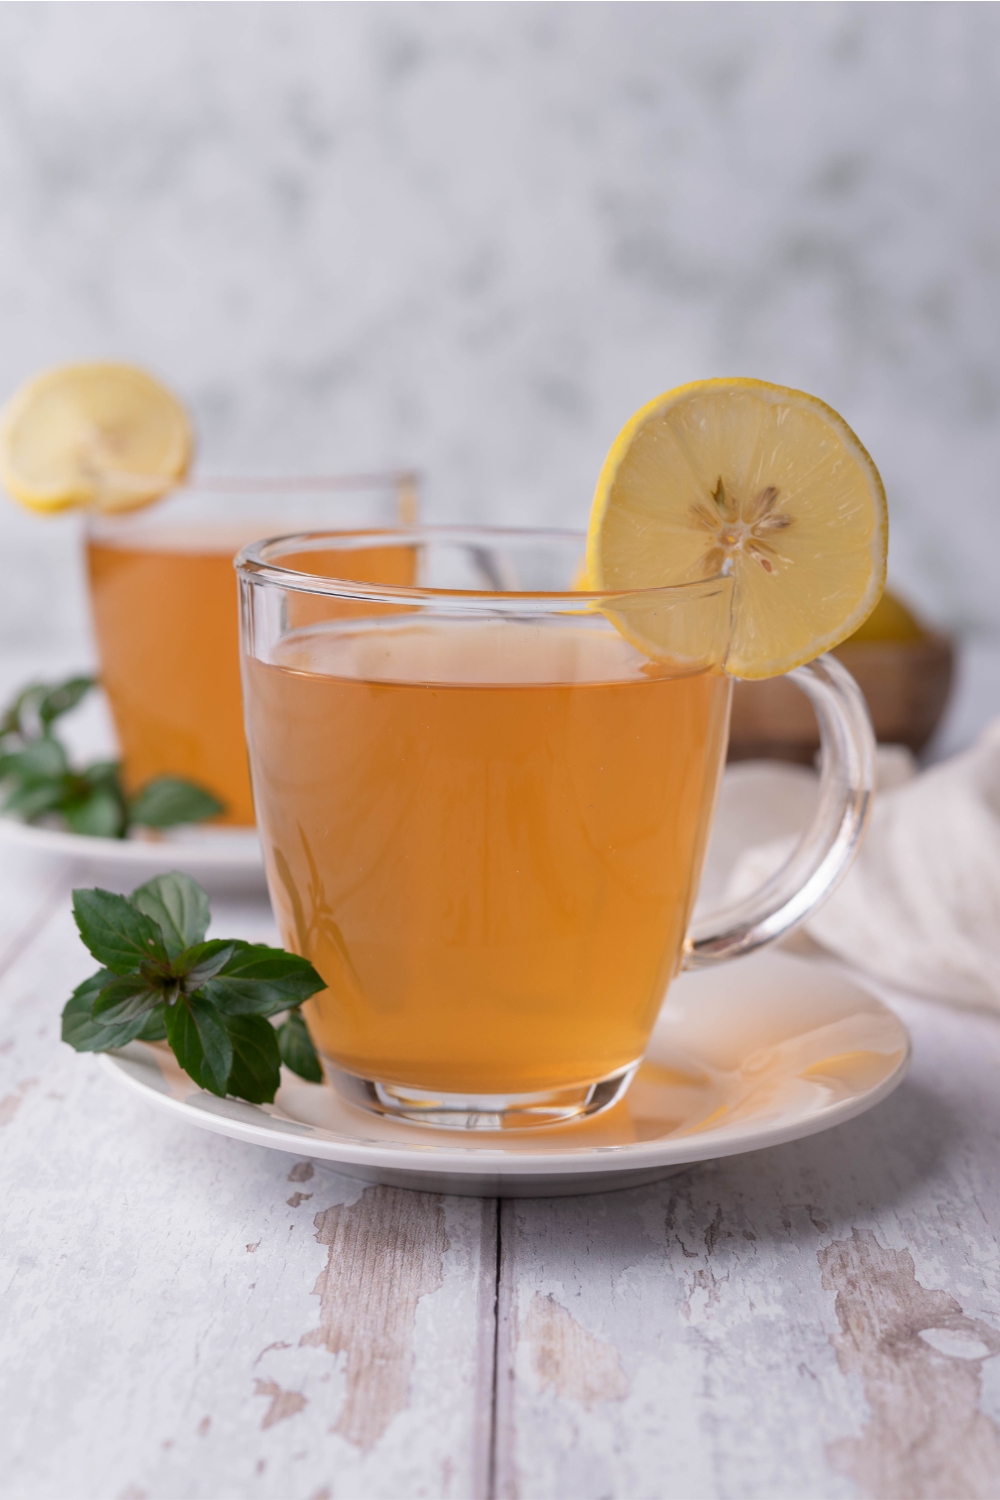 Two clear mugs with medicine ball tea in it and slices of lemon to garnish.